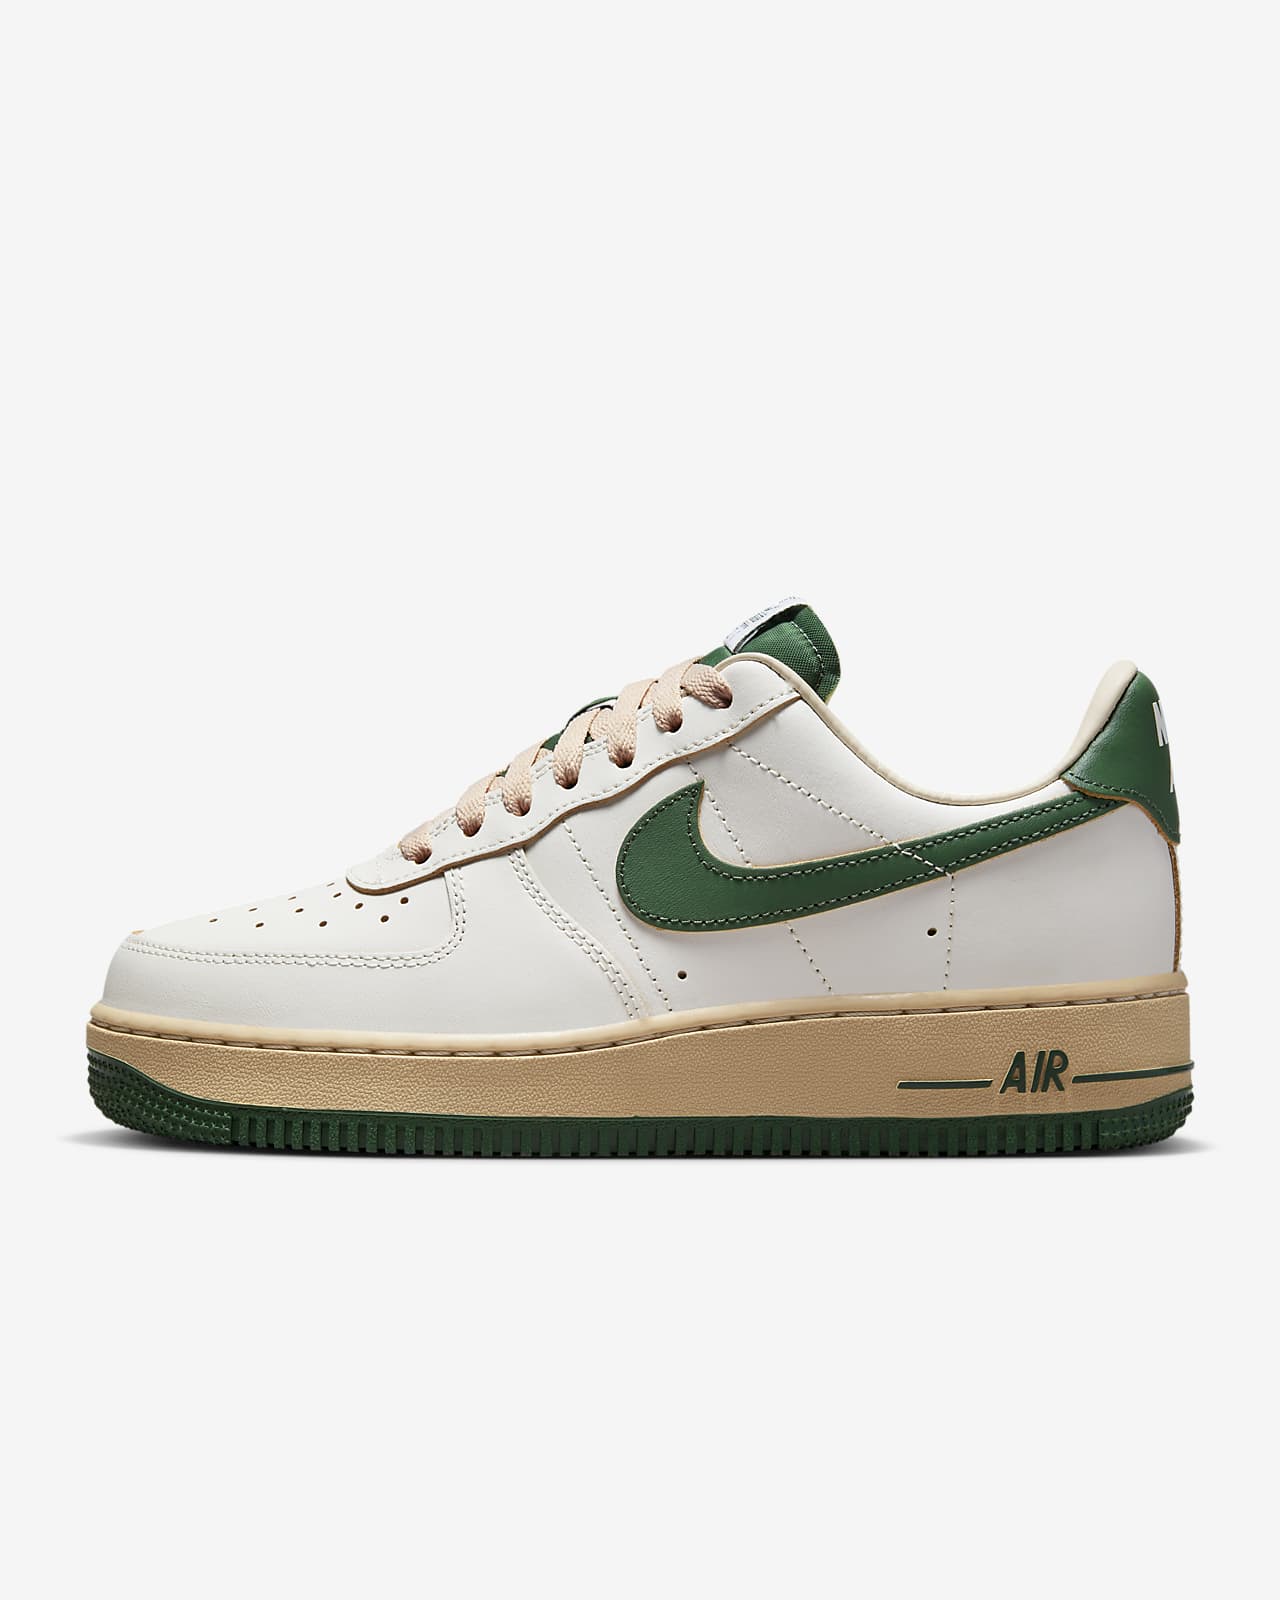 Chaussure Nike Air Force 1 '07 pour femme